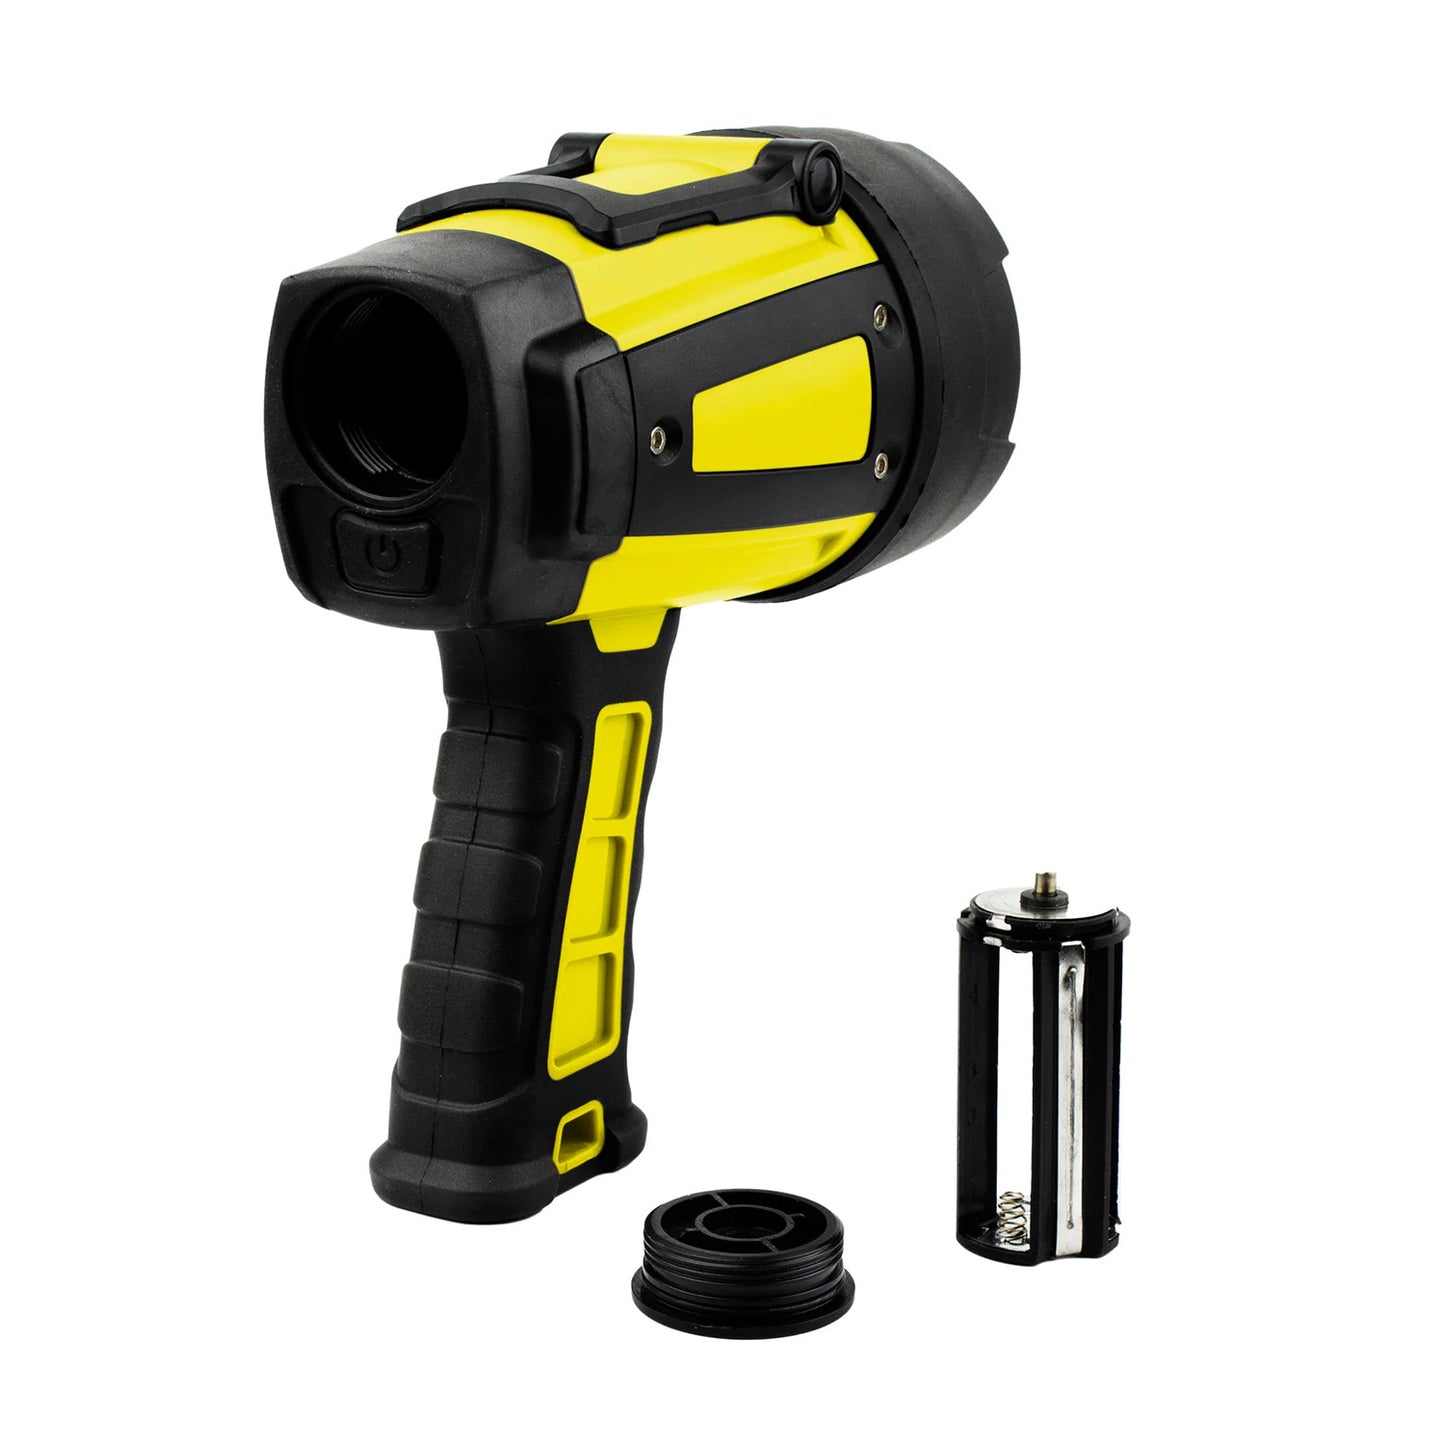 Wagan Brite-Nite W600 LED Spotlight Rear View With Battery Case